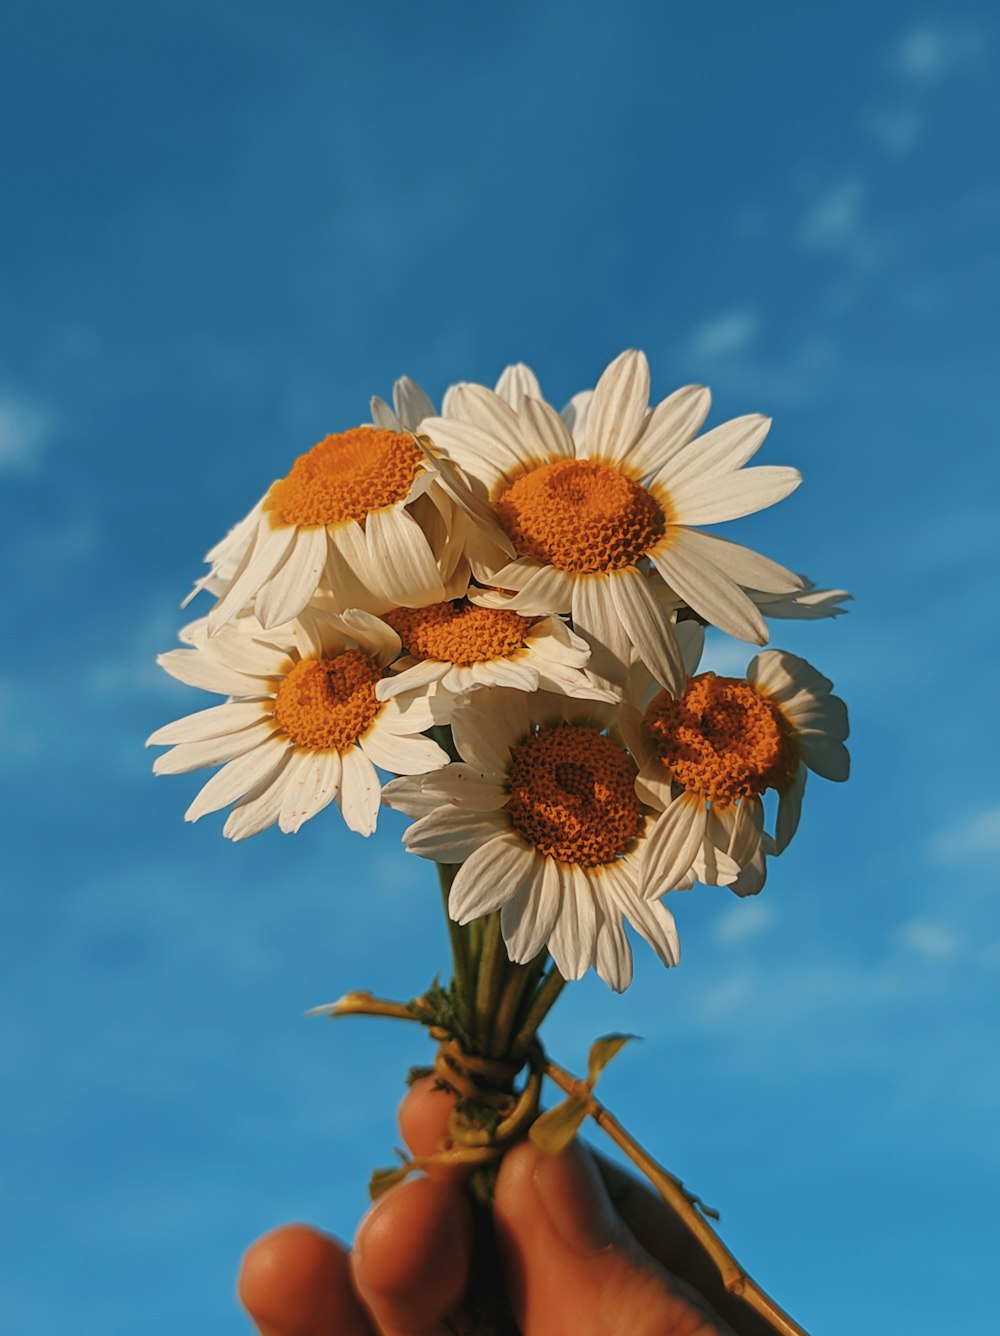 white and brown daisy flowers under blue sky during daytime